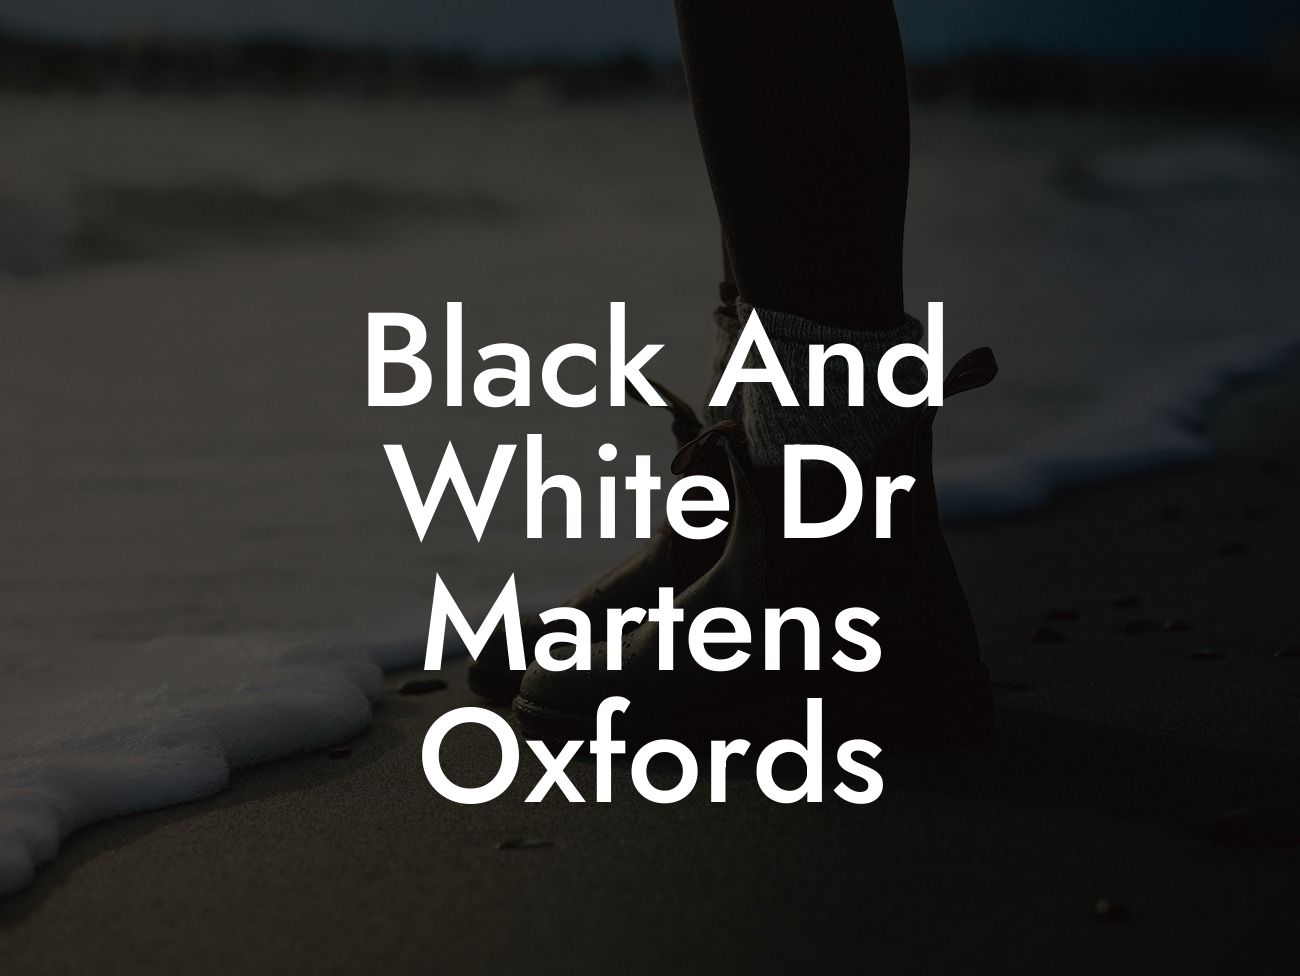 Black And White Dr Martens Oxfords